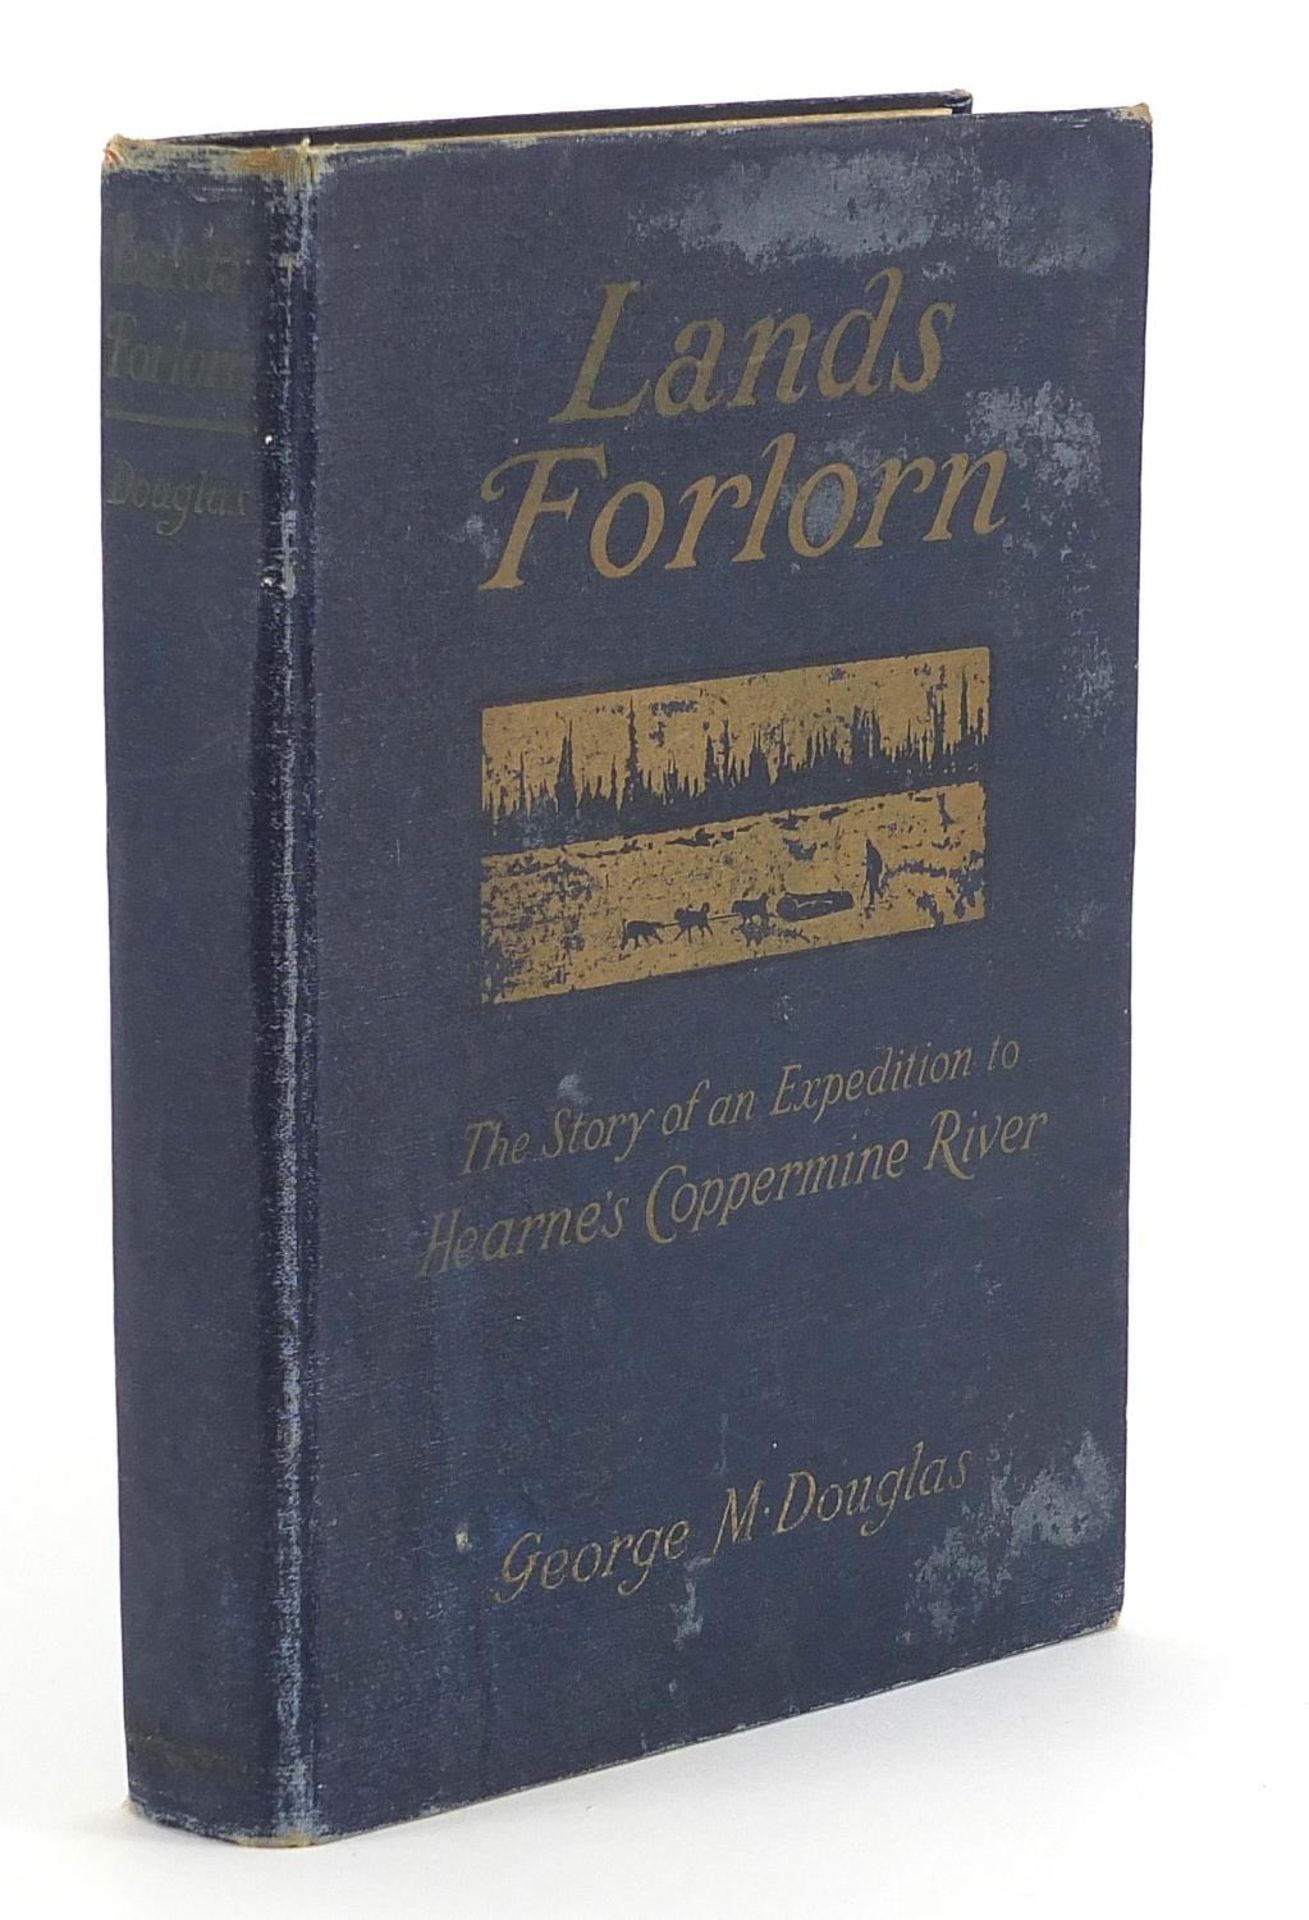 Lands Forlorn, hardback book with pull out map by George Douglas published J P Putnams & Sons, 1914